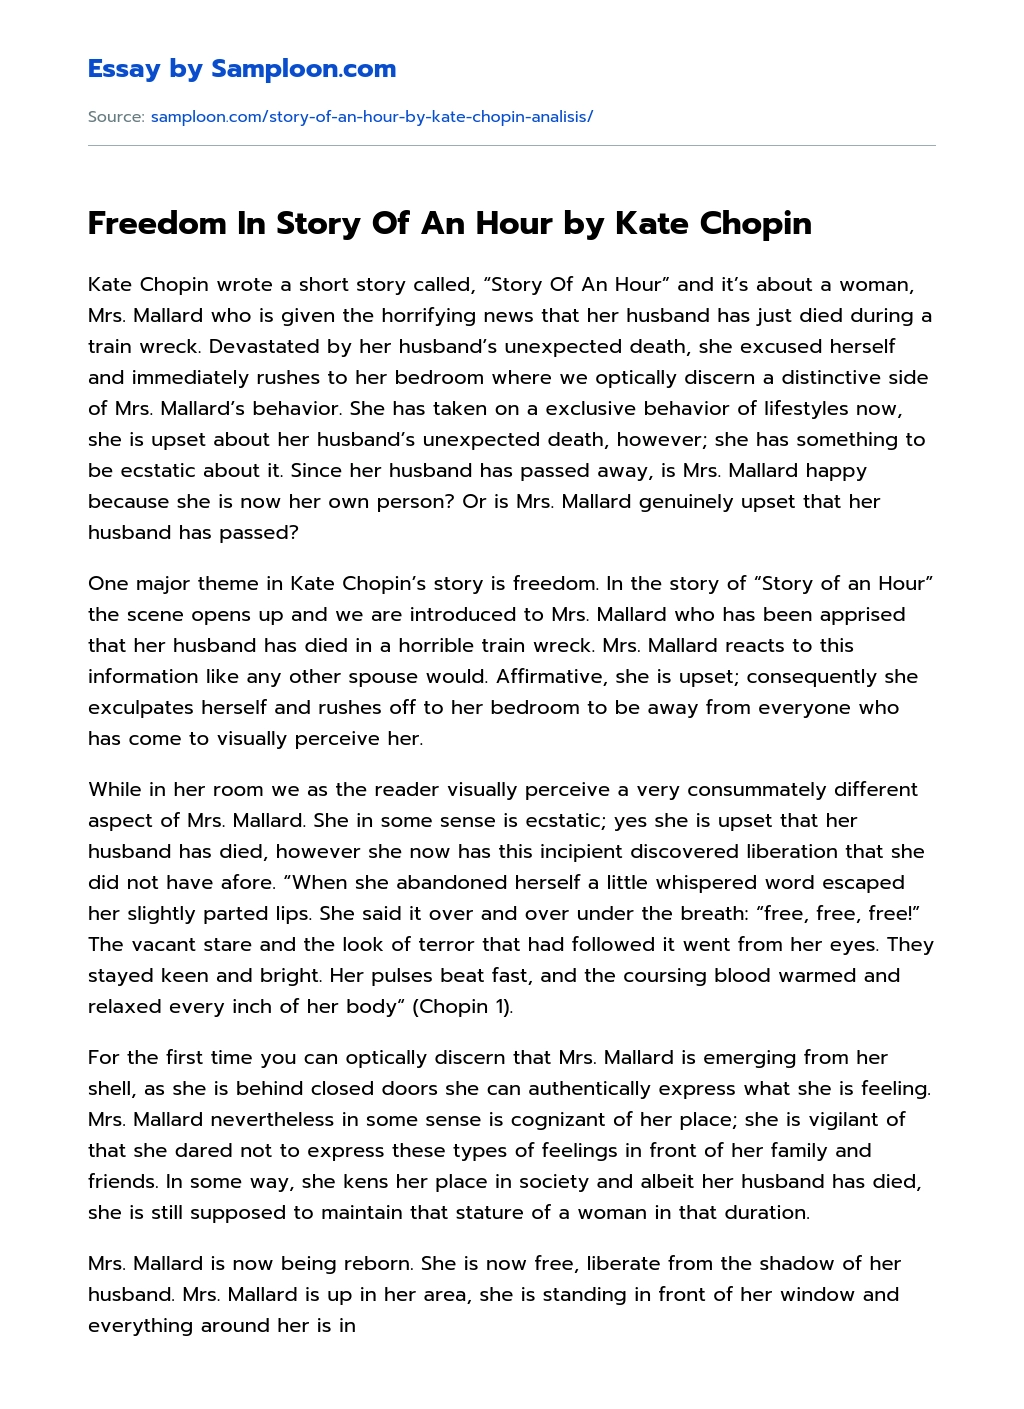 Freedom In Story Of An Hour by Kate Chopin essay